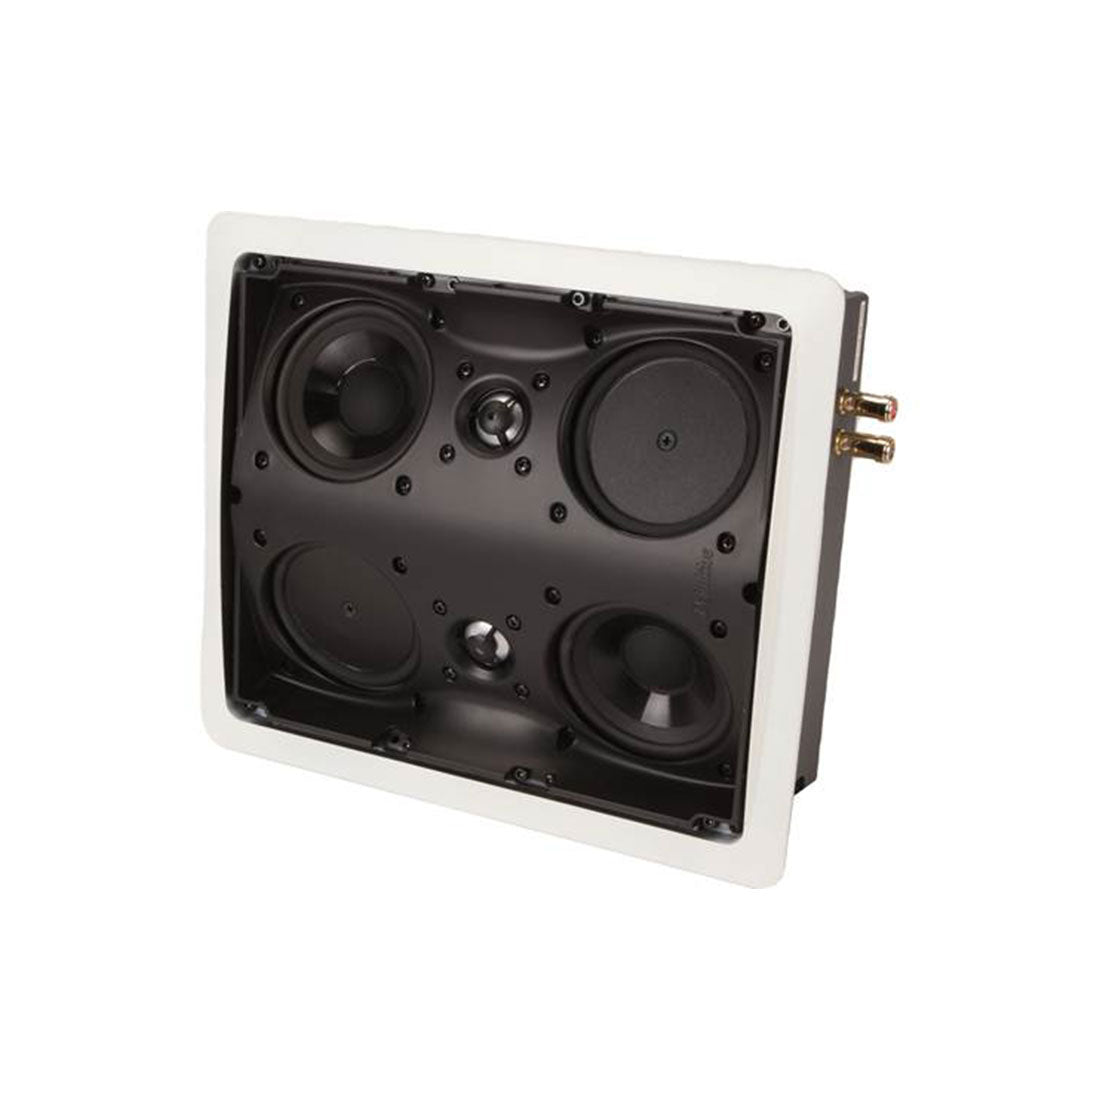 Definitive Technology UIW RSS II In-Wall / In-Ceiling Surround Speaker - White